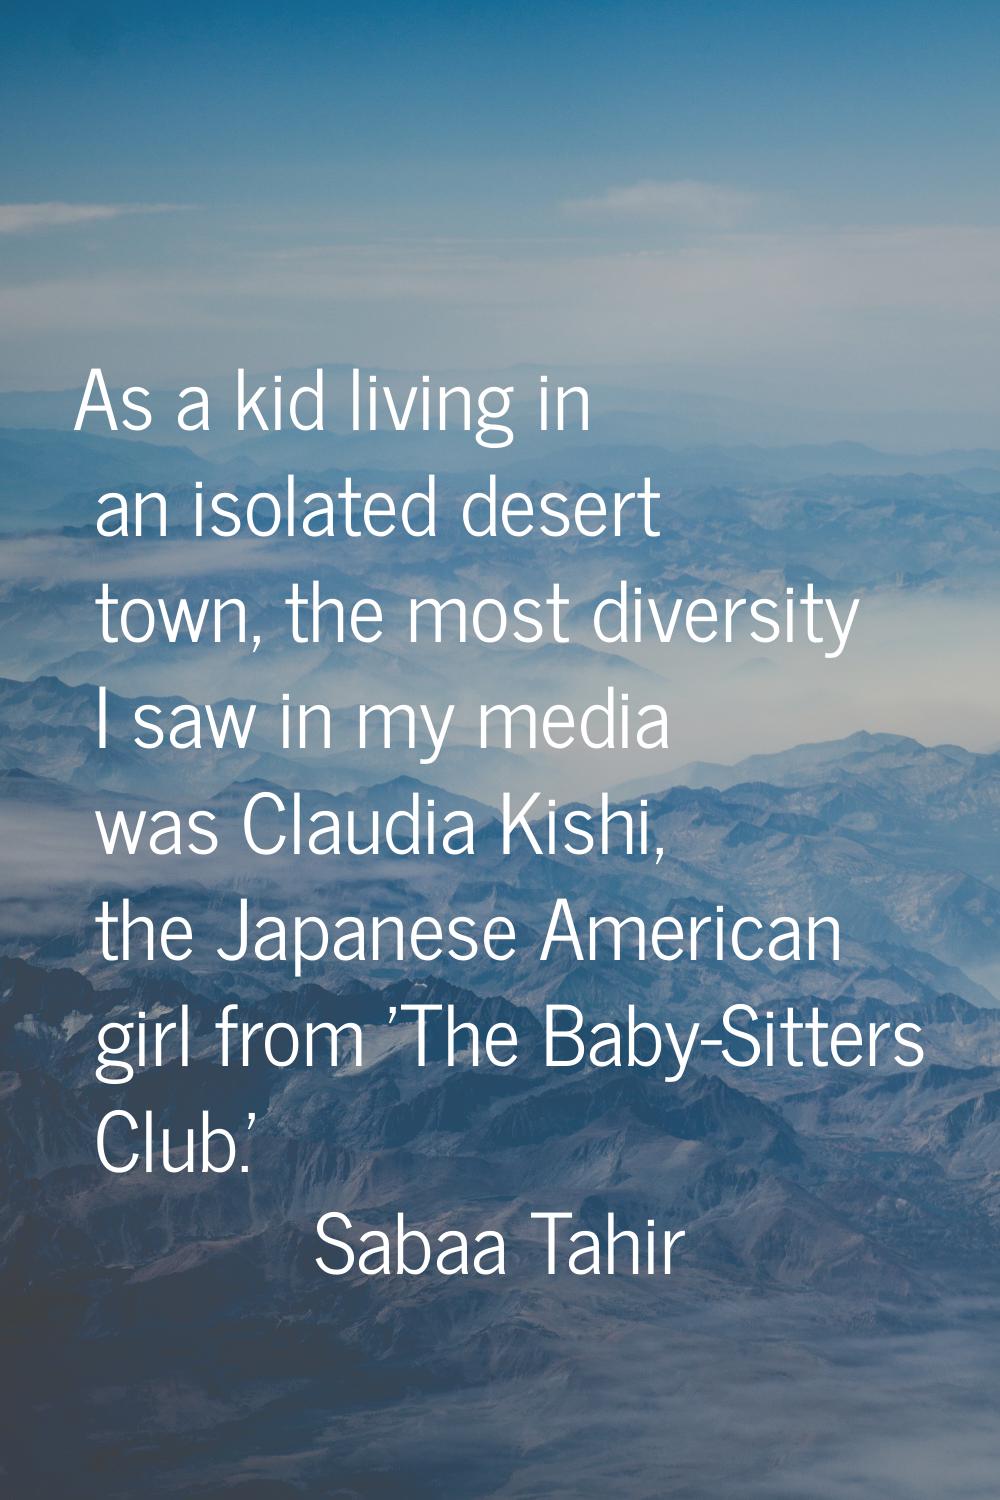 As a kid living in an isolated desert town, the most diversity I saw in my media was Claudia Kishi,